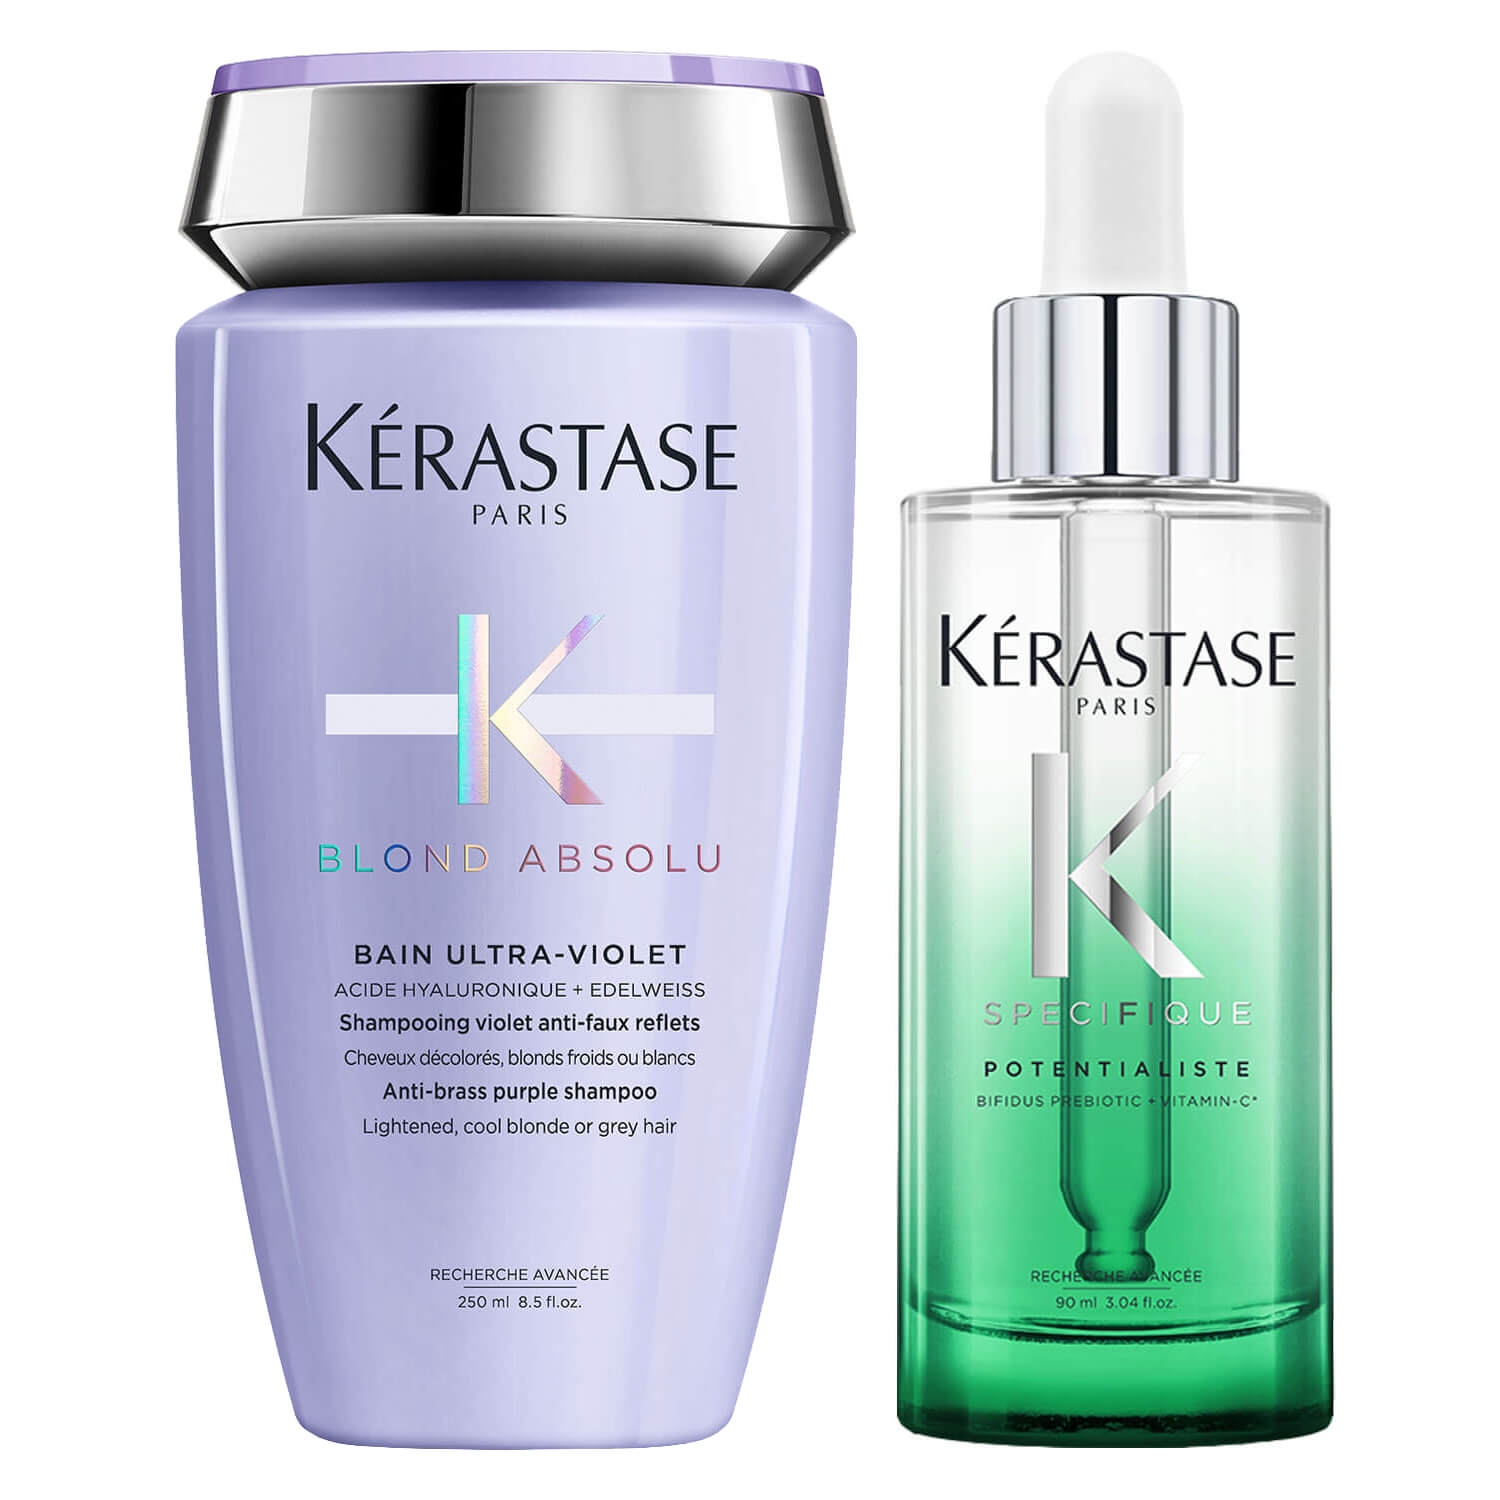 Product image from Spécifique - Potentialiste Serum + Blond Absolu Bain Ultra-Violet